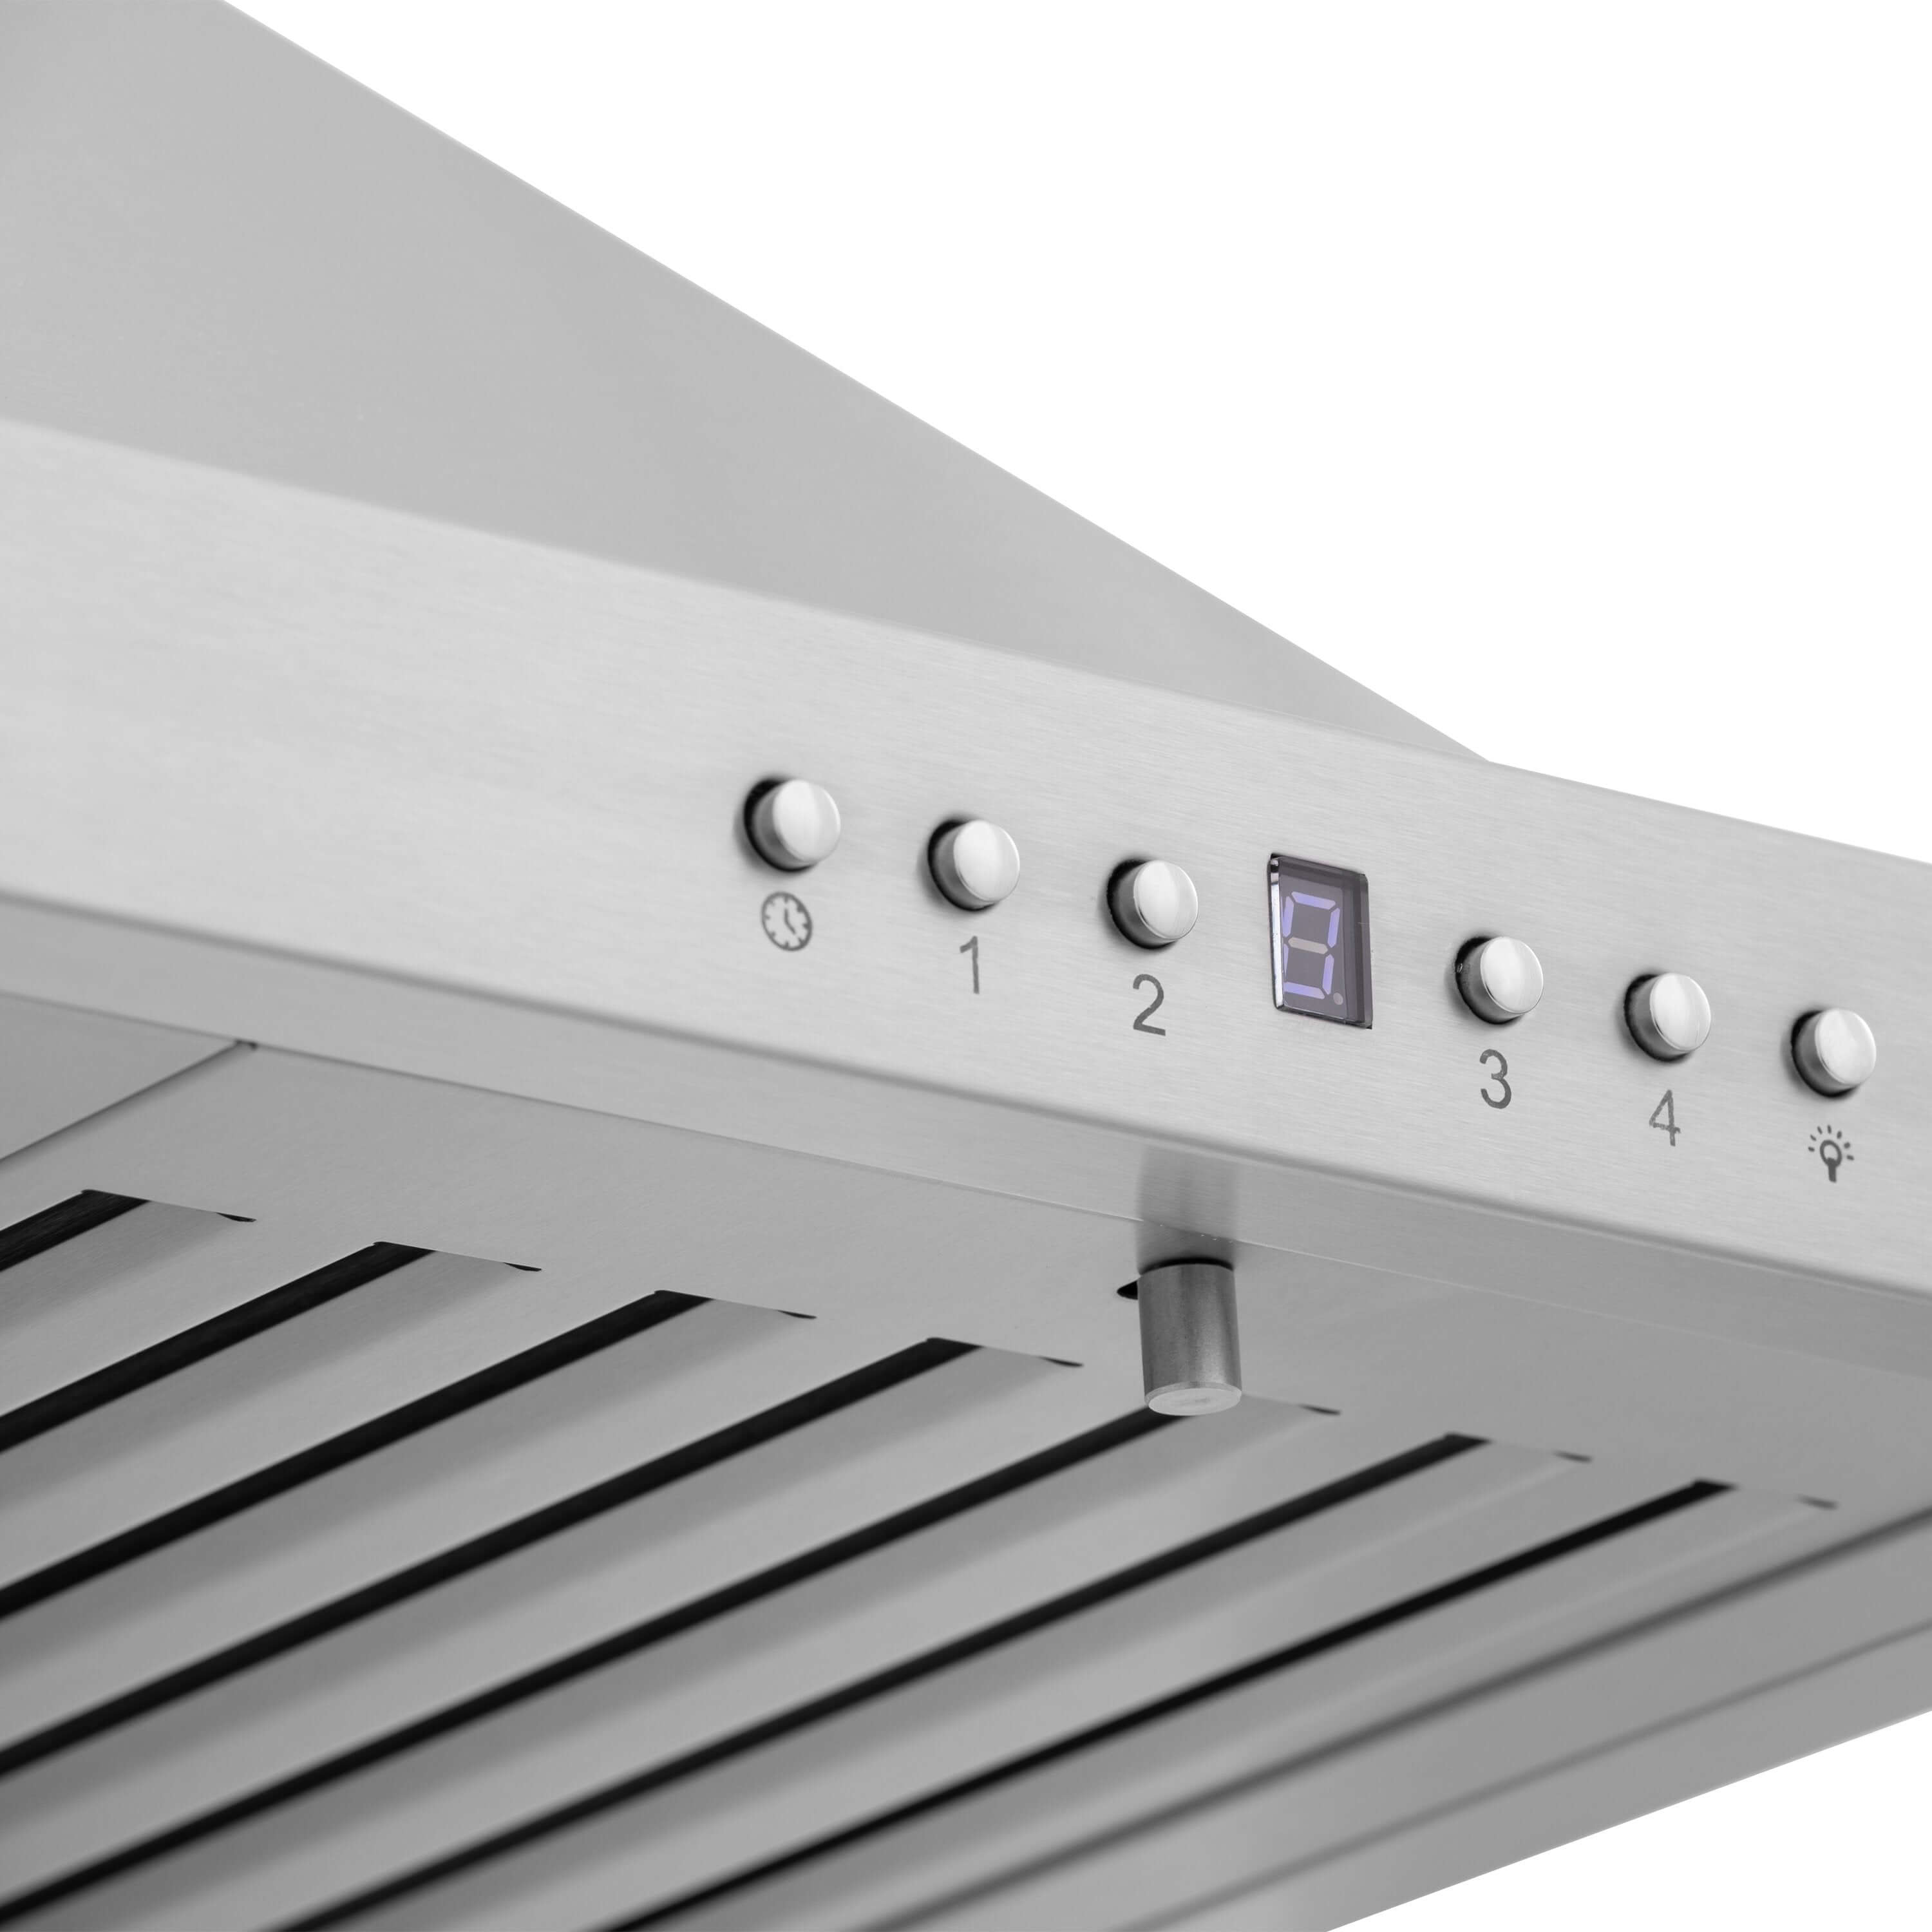 ZLINE 48 in. Recirculating Wall Mount Range Hood with Charcoal Filters in Stainless Steel (KB-CF-48) fan and lighting control buttons.